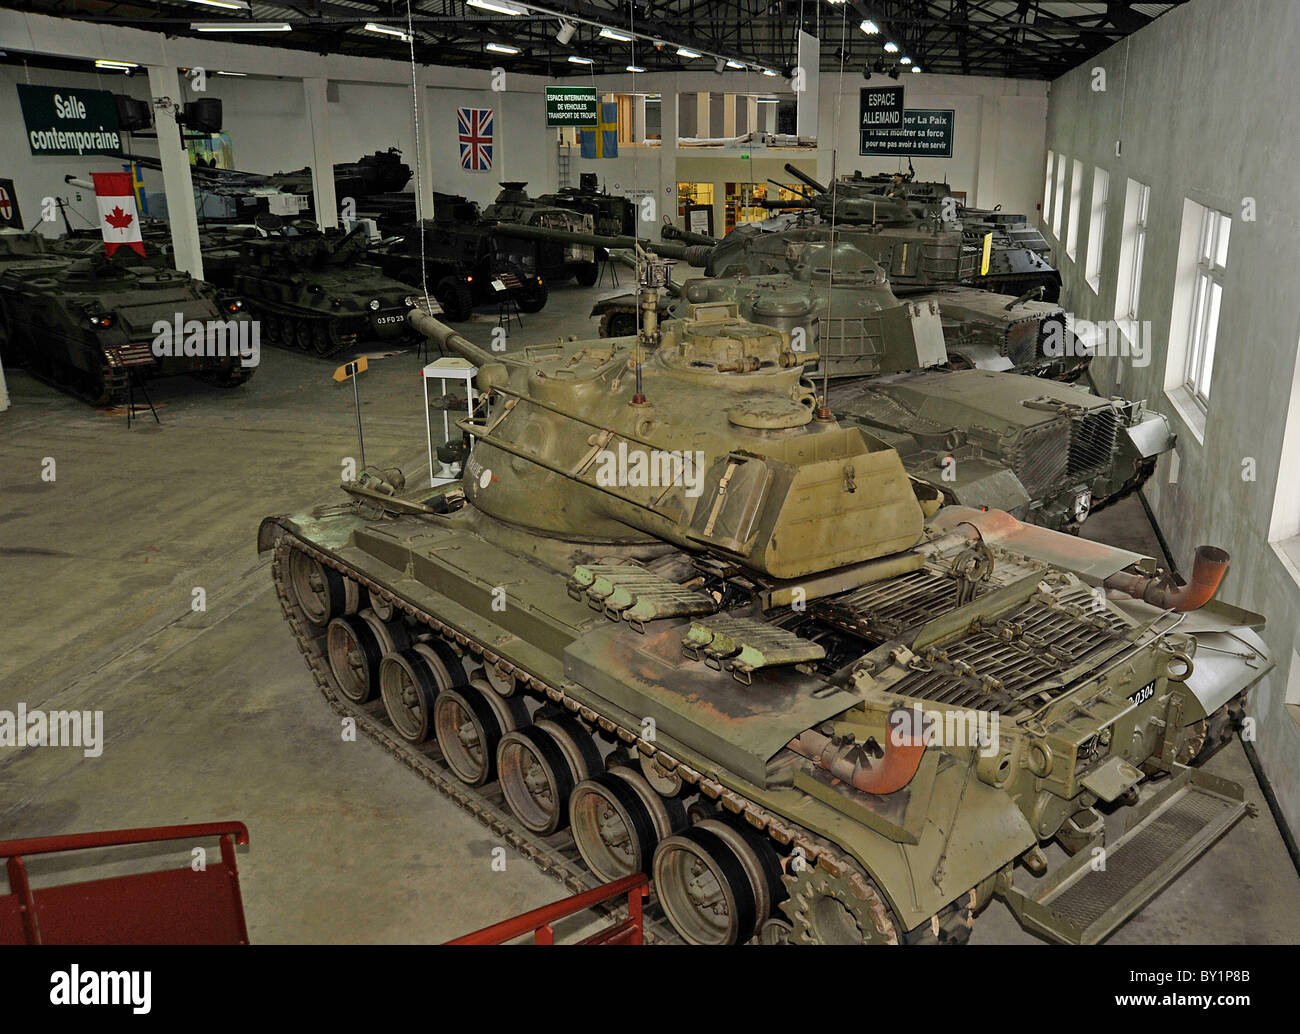 Tanks on display at the tank museum Saumur France Stock Photo